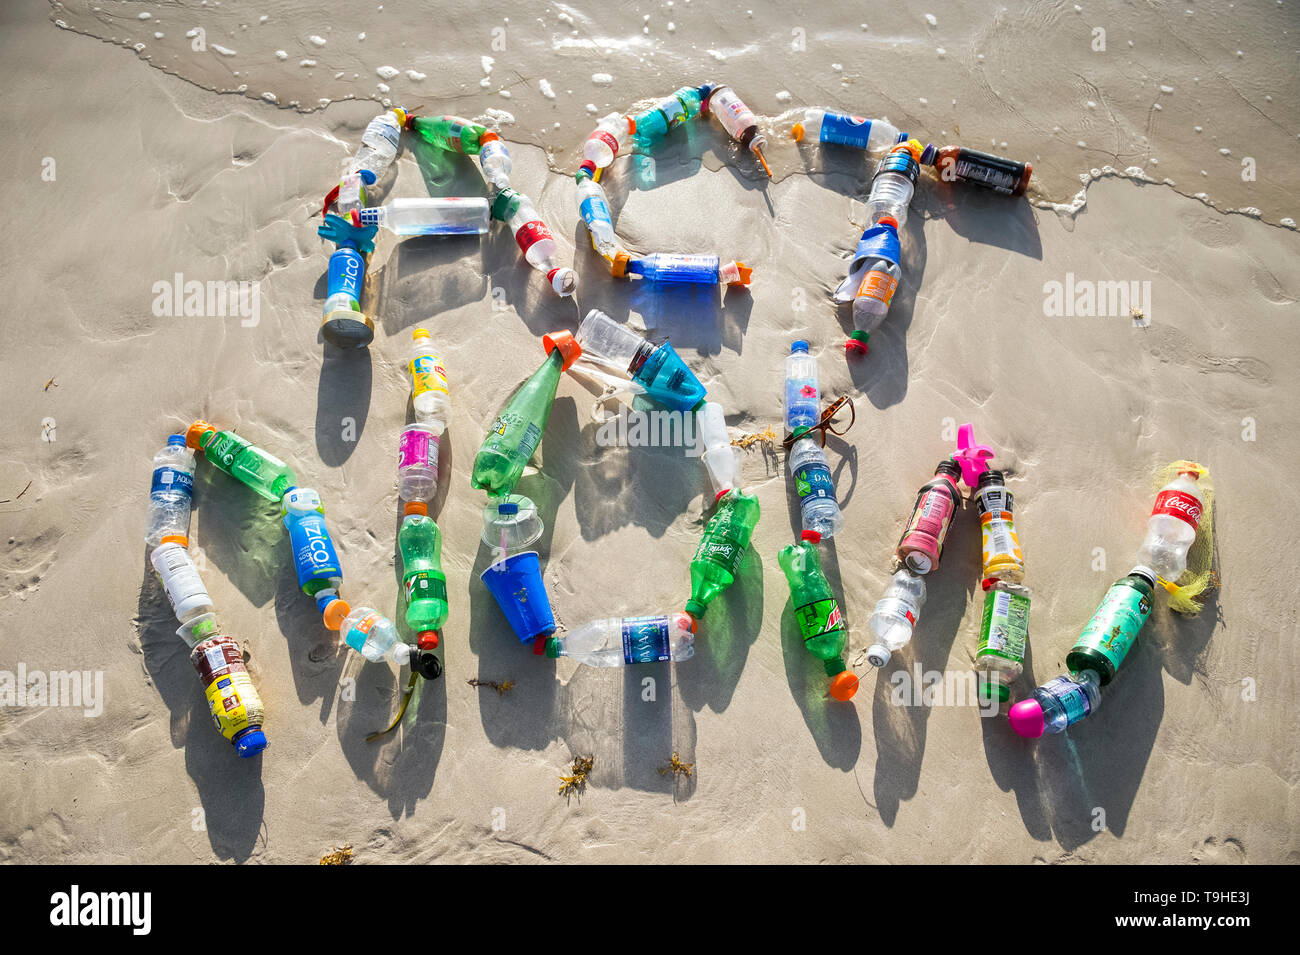 MIAMI - AUGUST, 2018: Ocean plastic pollution awareness message made from consumer drink and water bottles found on the beach spells out Act Now. Stock Photo